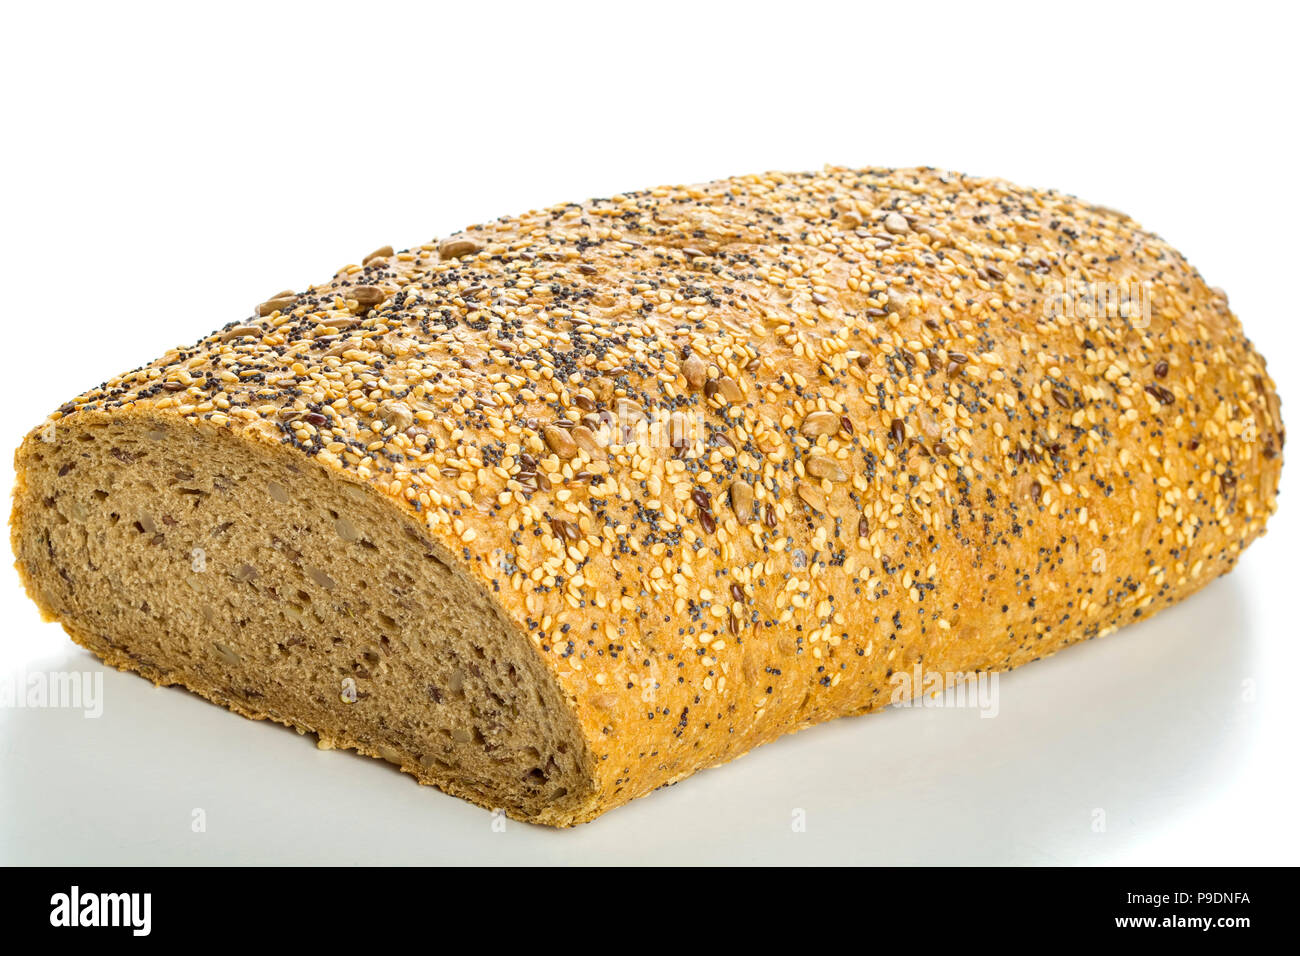 Bread covered with different types of seeds isolated over white background Stock Photo